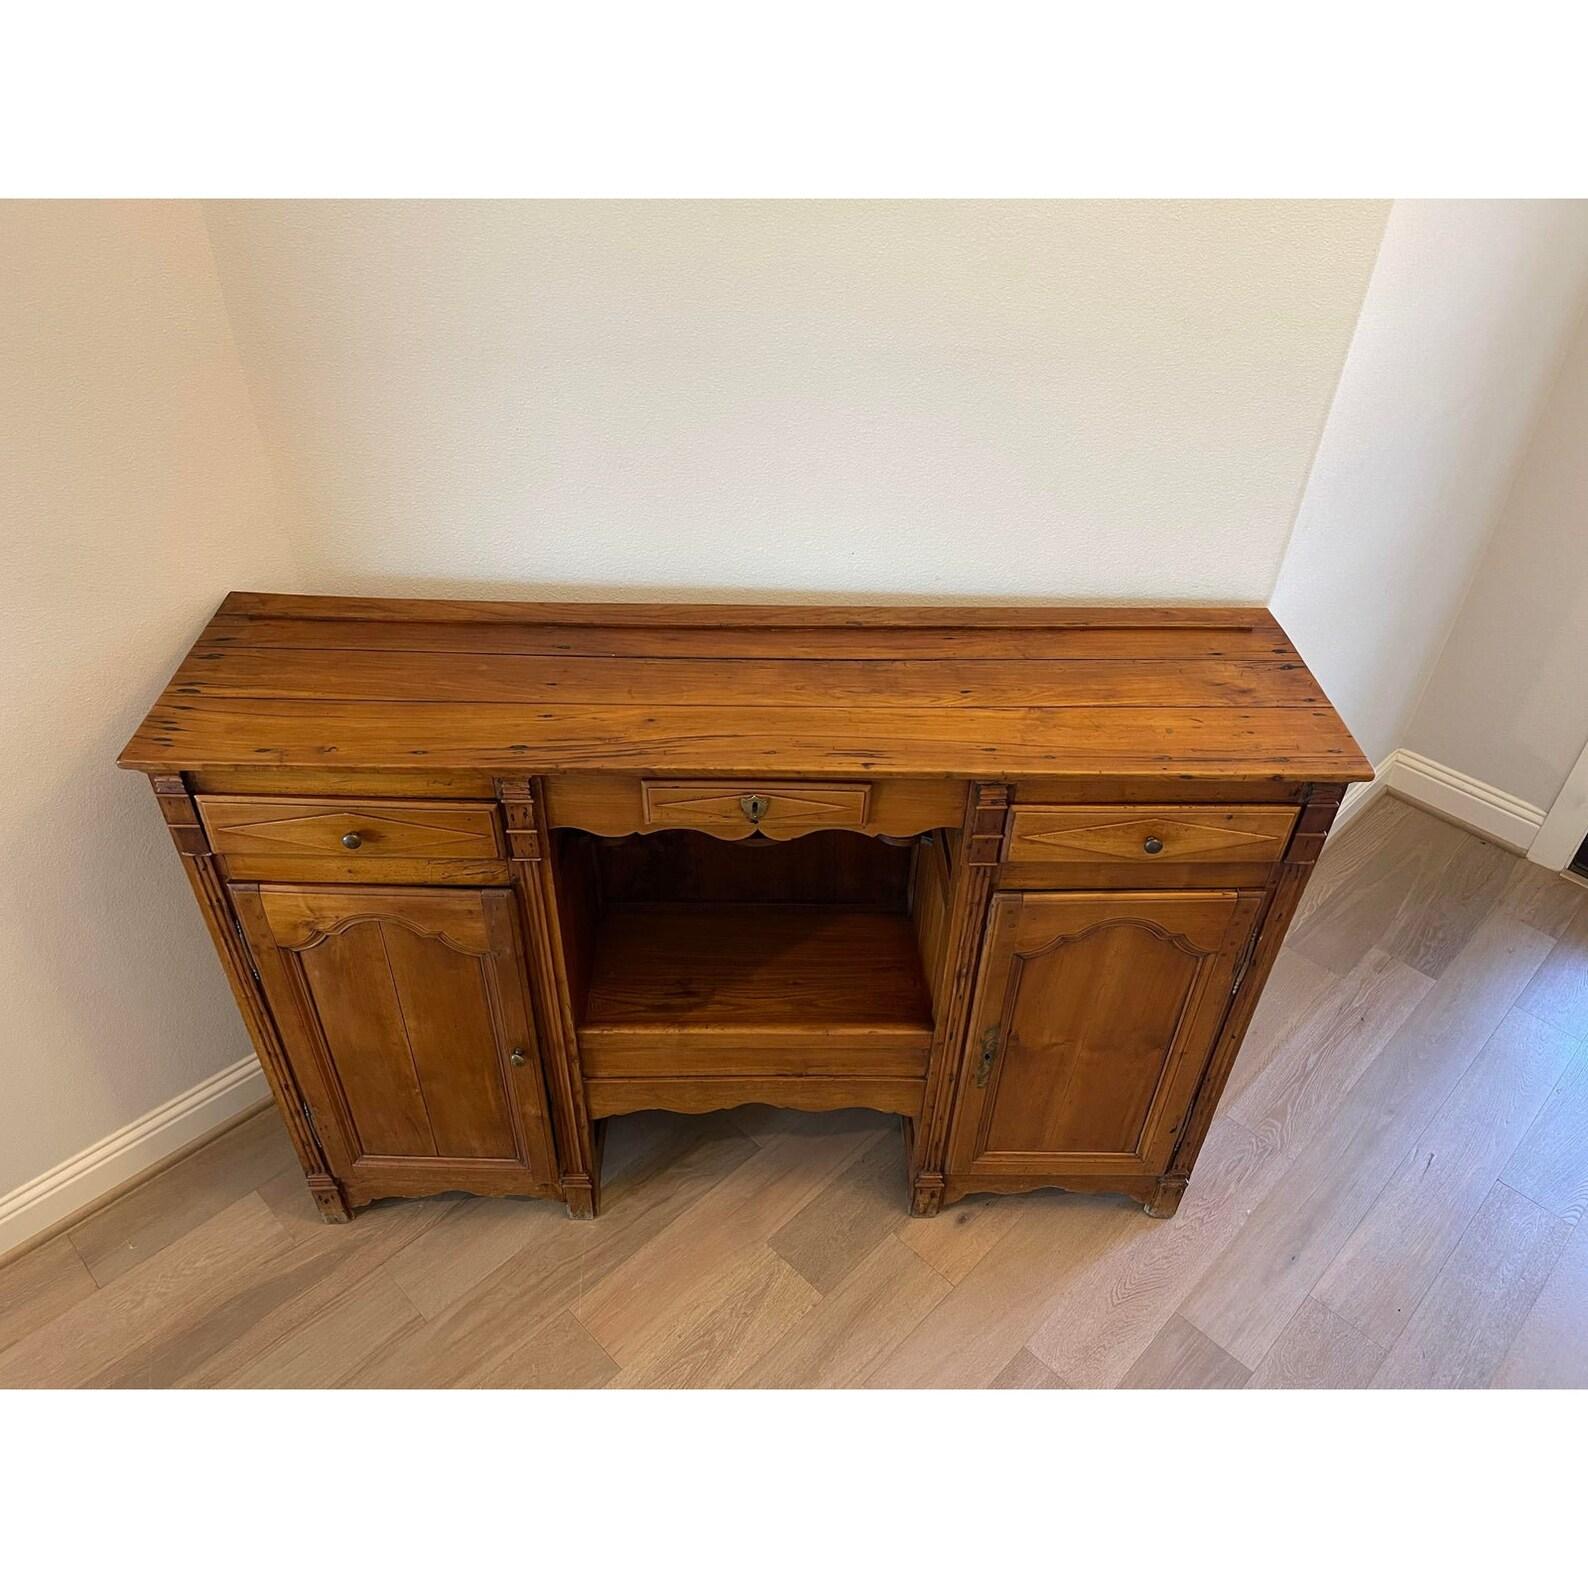 Southwestern France, circa 1820, Provincial Picardie influences, having a rectangular three board planked top, over a trio of frieze drawers, featuring central open shelf wine bottle storage designed to display large vineyard winery magnum bottles,